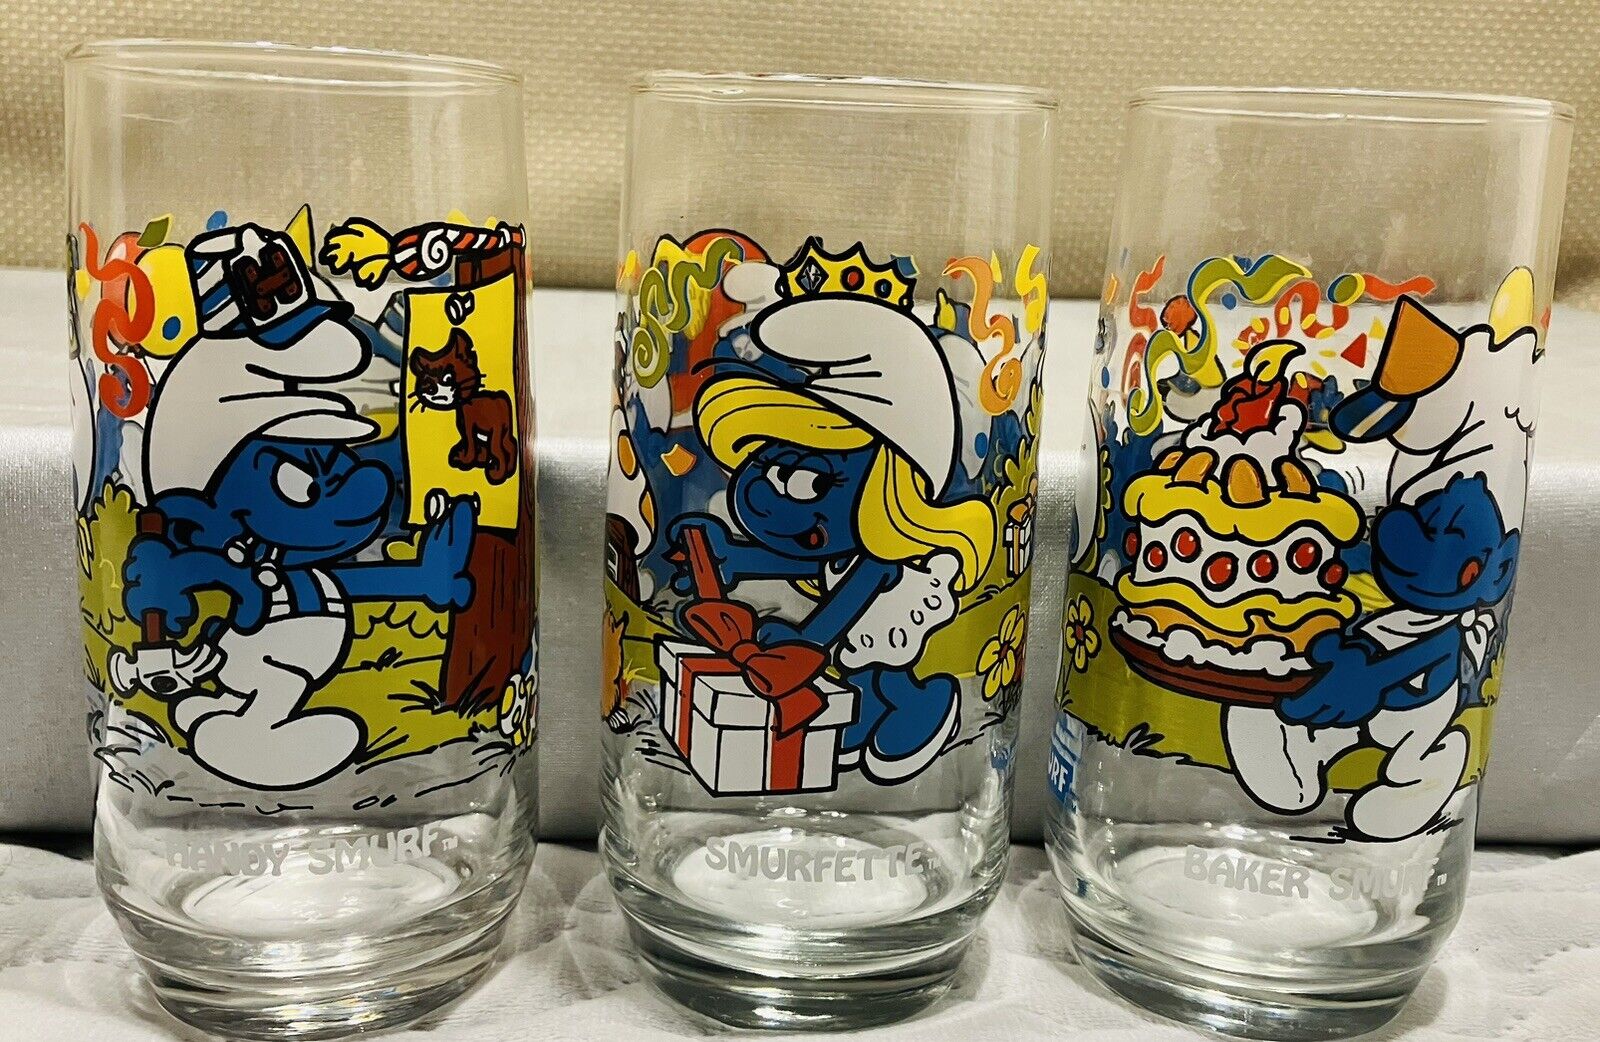 1983 VTG Hardee\'s Collectible Smurf Glasses, Set of 3 Condition Libby